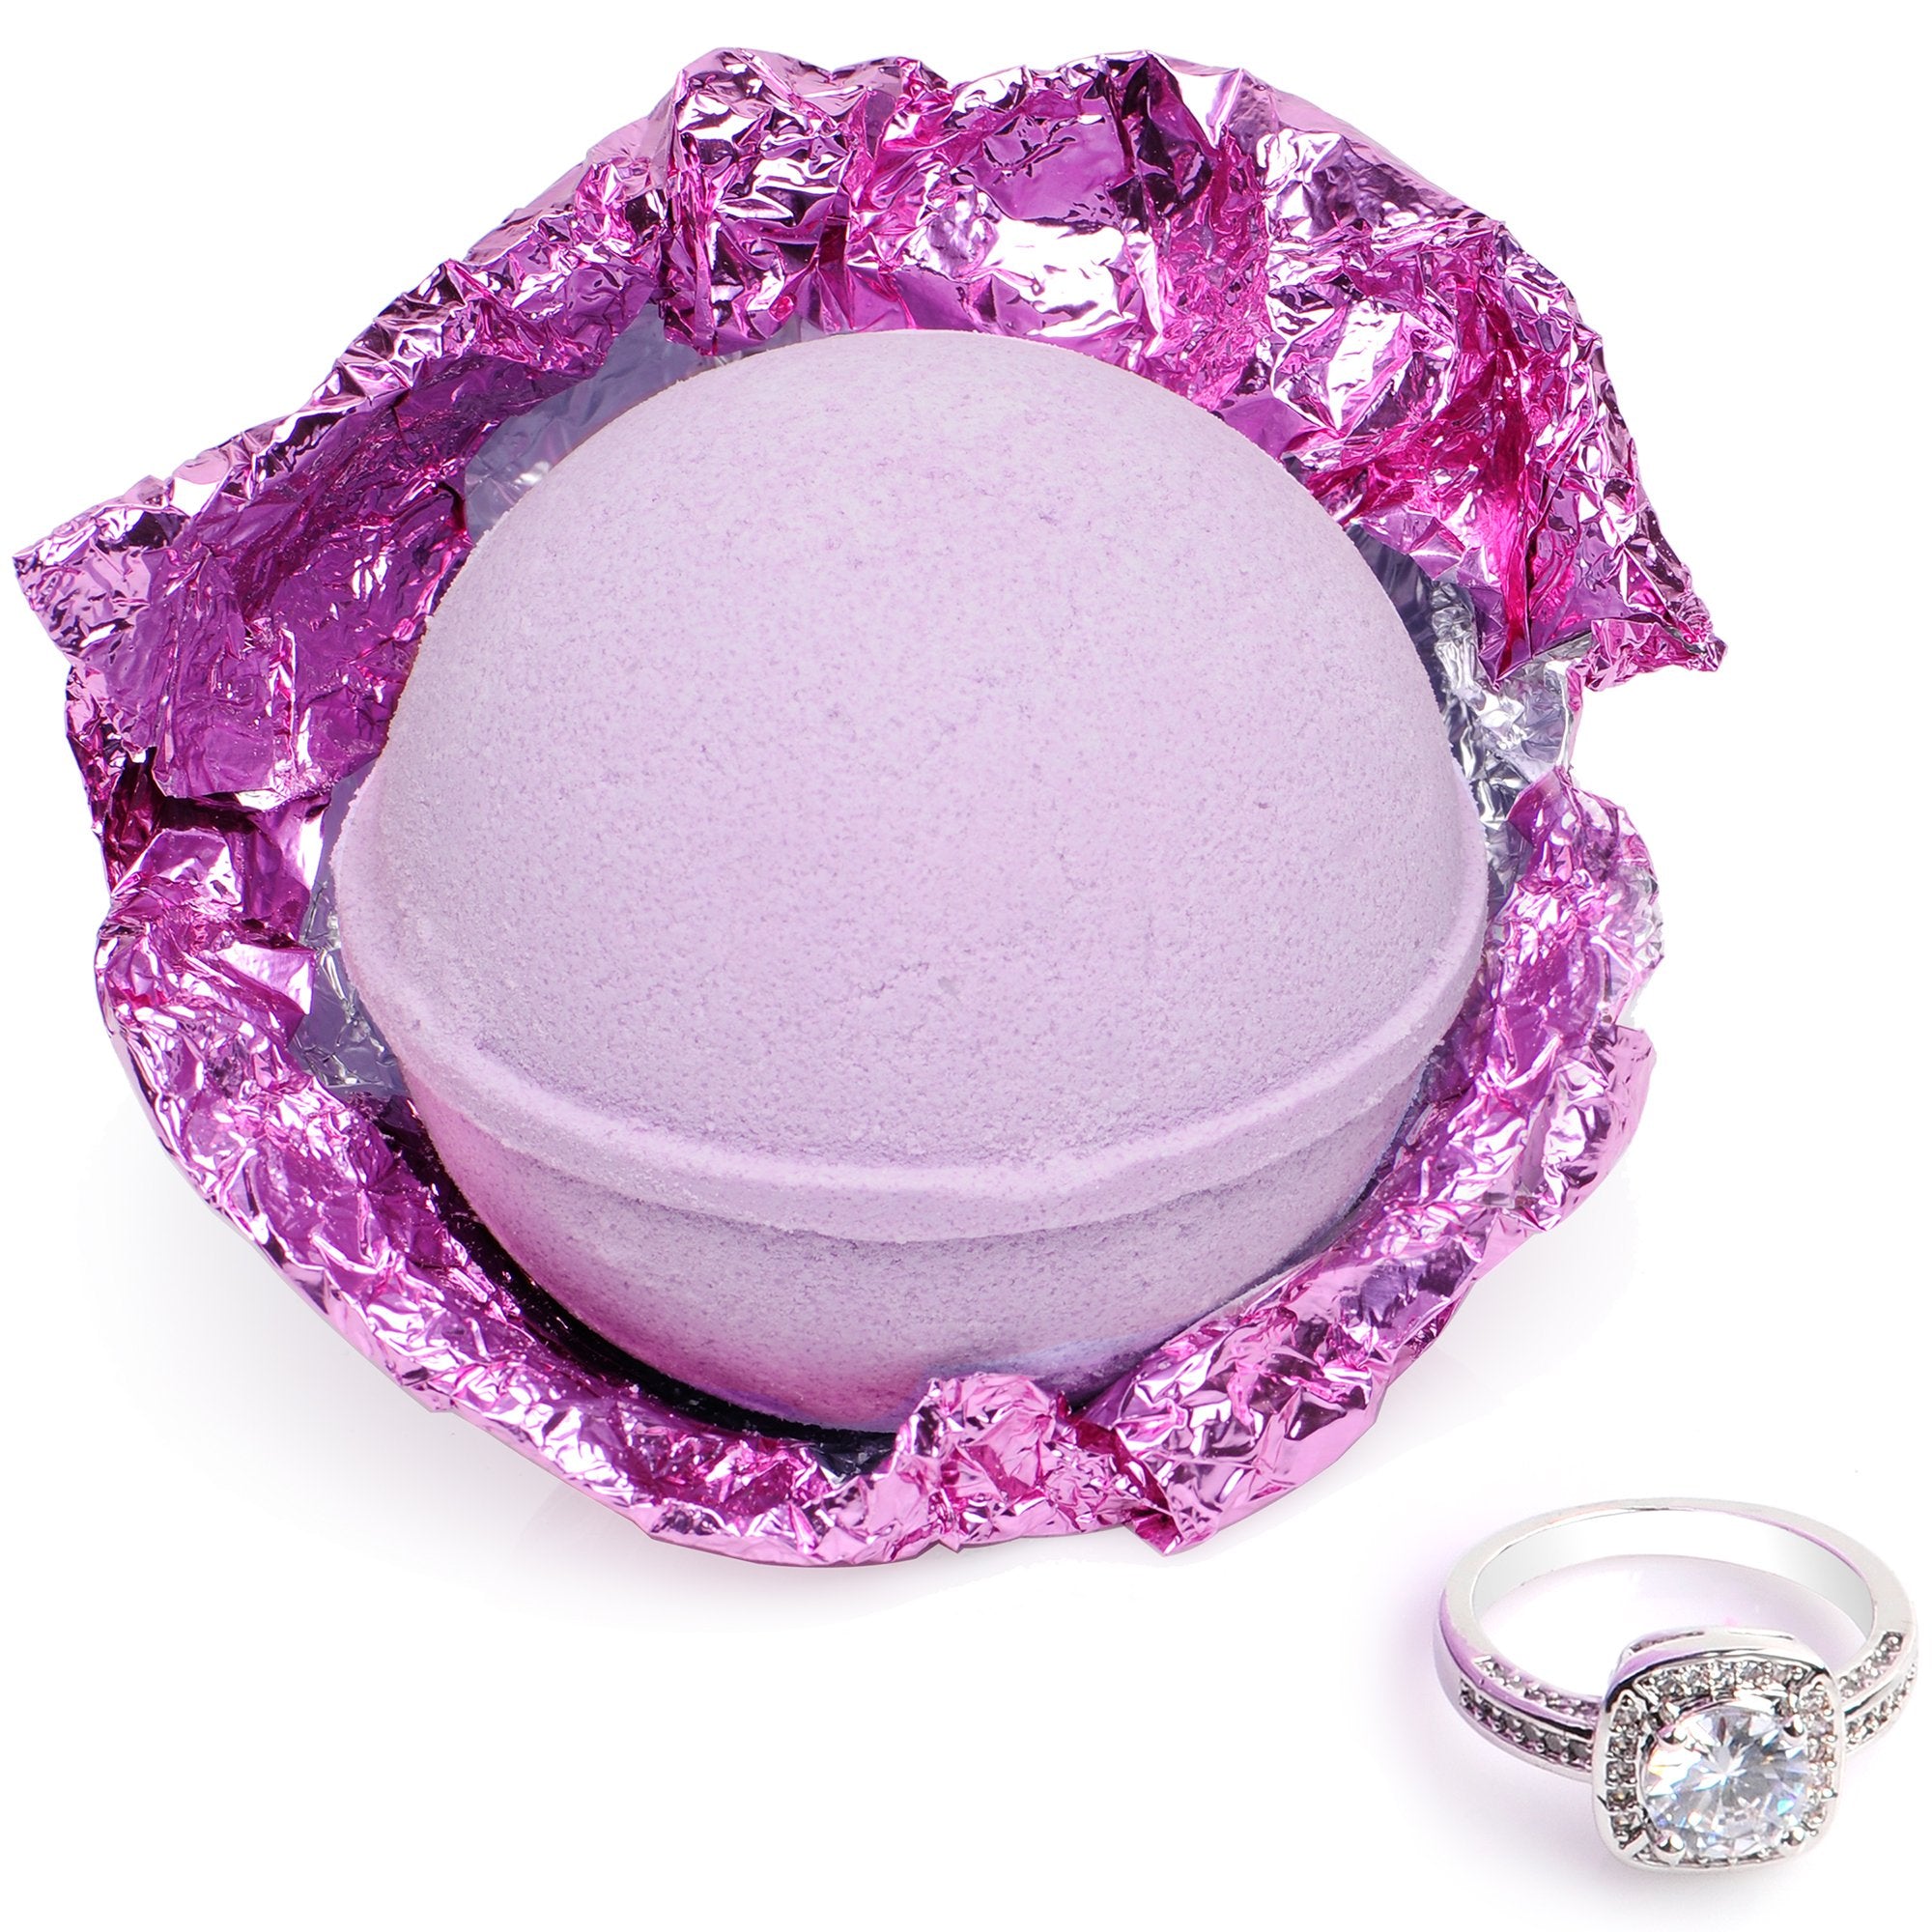 Enliven Me Lavender Bath Bomb with Jewelry Ring Inside